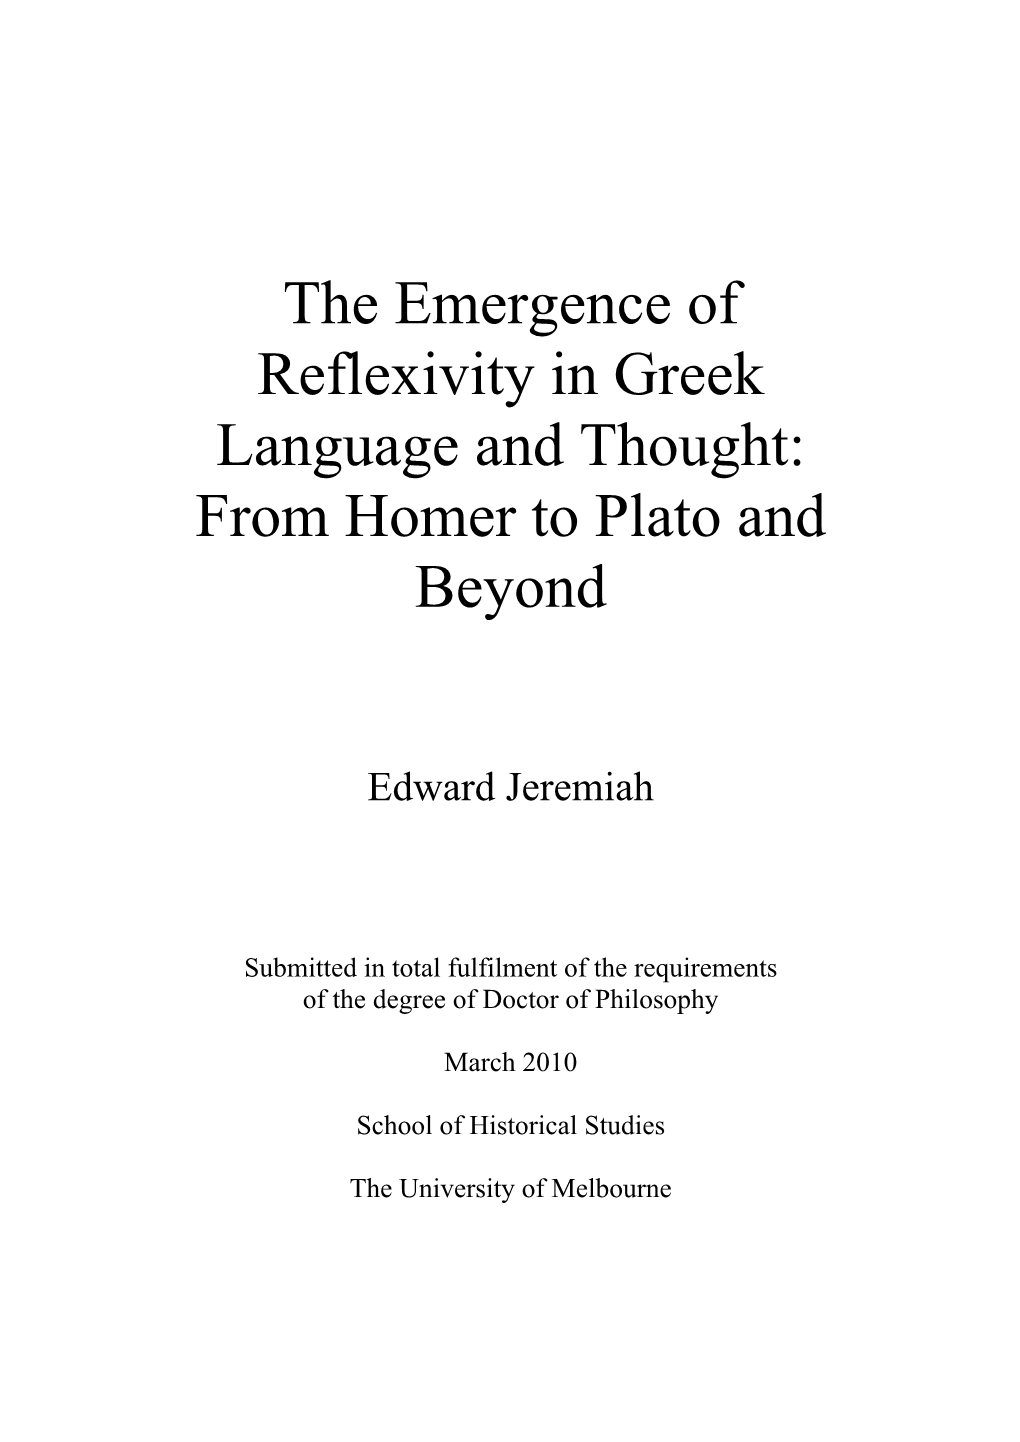 The Emergence of Reflexivity in Greek Language and Thought: from Homer to Plato and Beyond